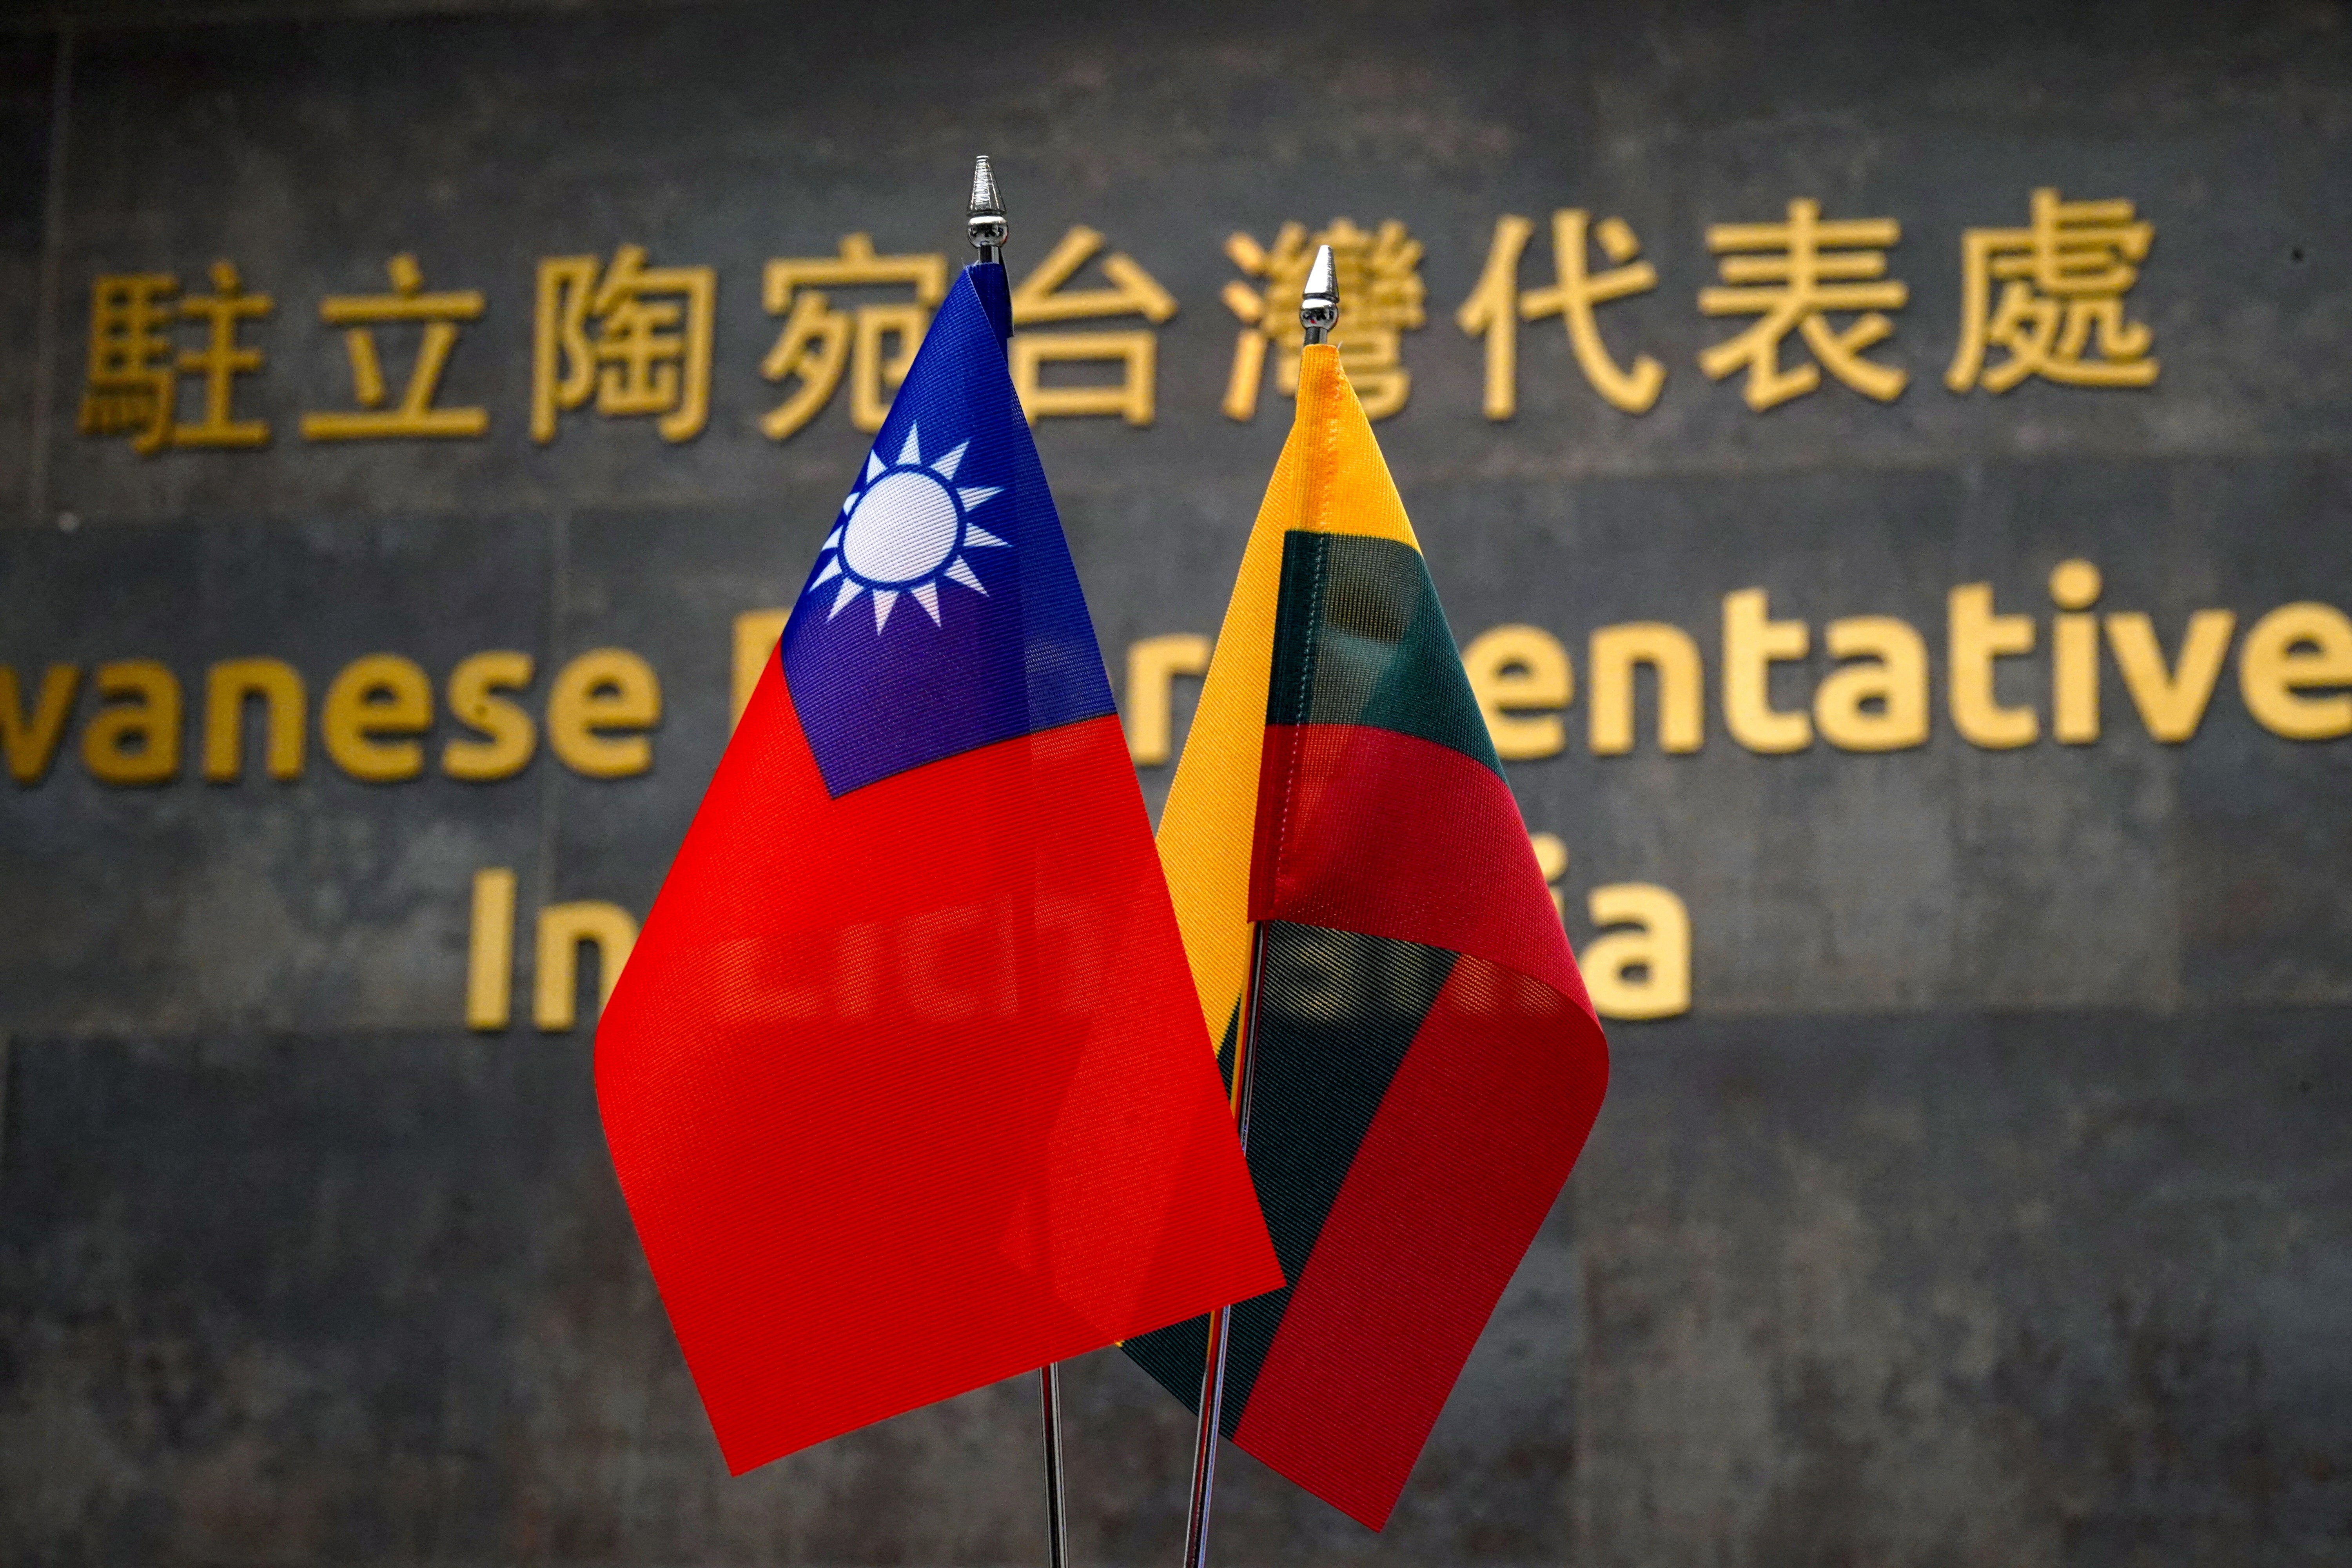 Taiwanese and Lithuanian flags are displayed at the Taiwanese Representative Office in Vilnius, Lithuania